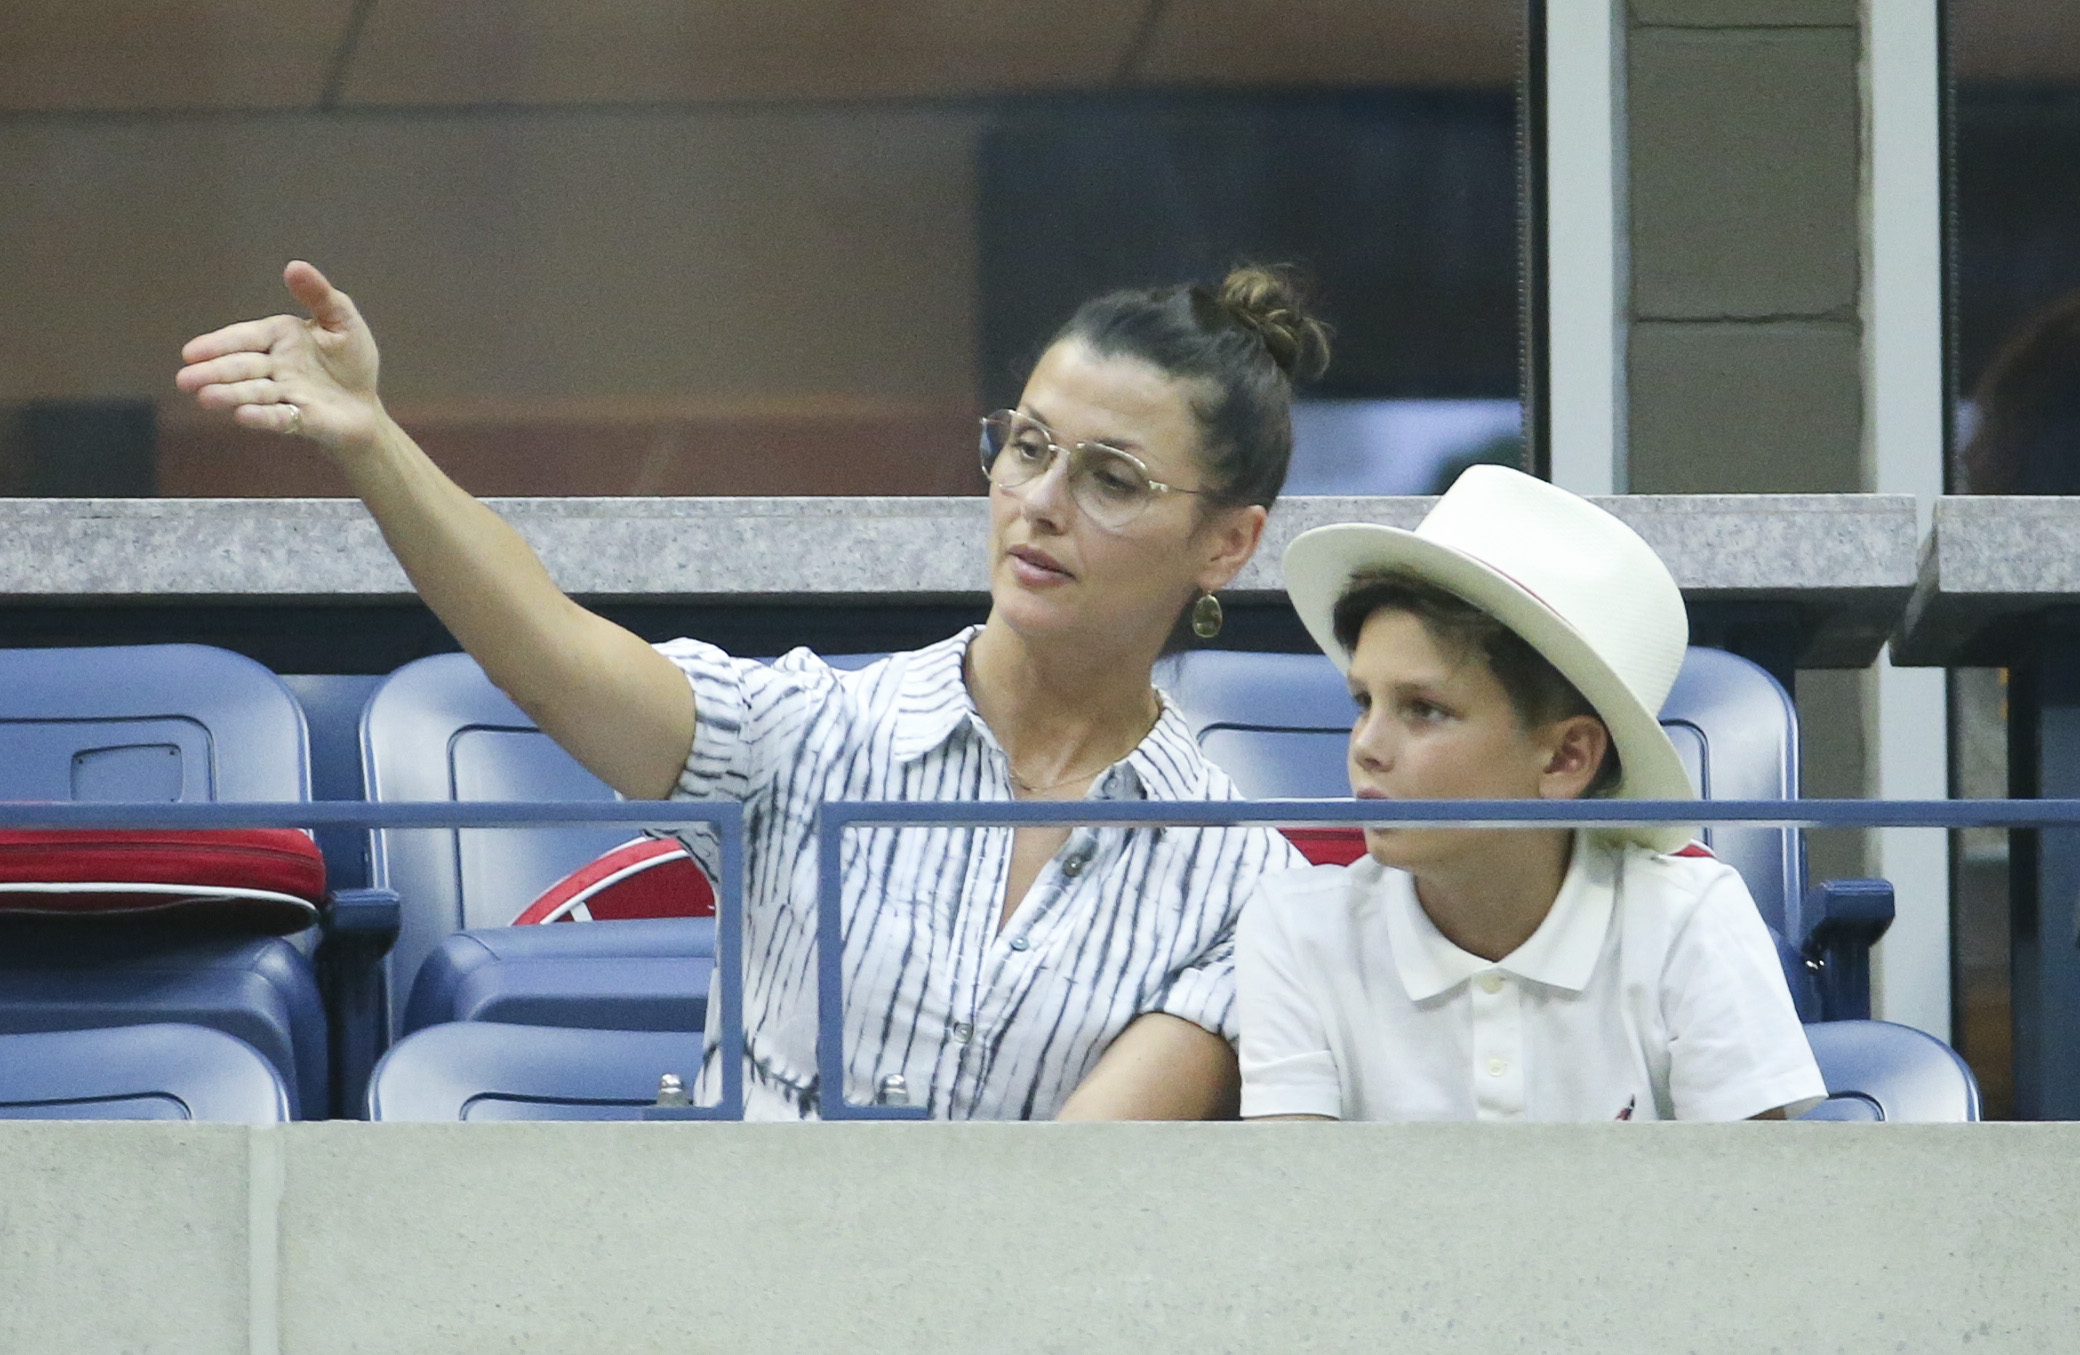 Bridget Moynahan and son Jack at the 2018 US Open in New York City on August 29, 2018 | Source: Getty Images